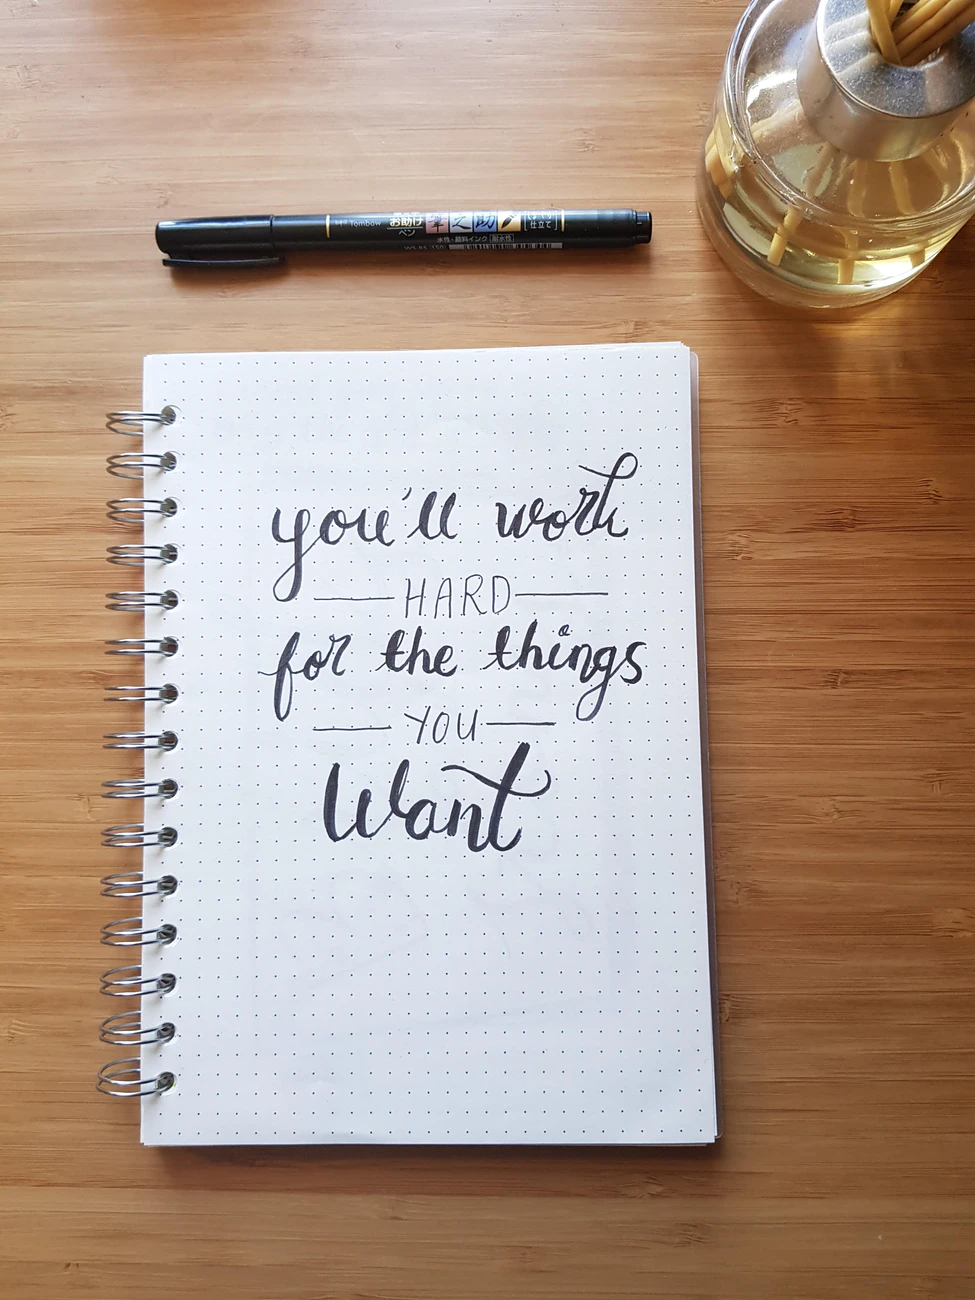 Writing of motivational quote “you’ll work hard for the things you want”